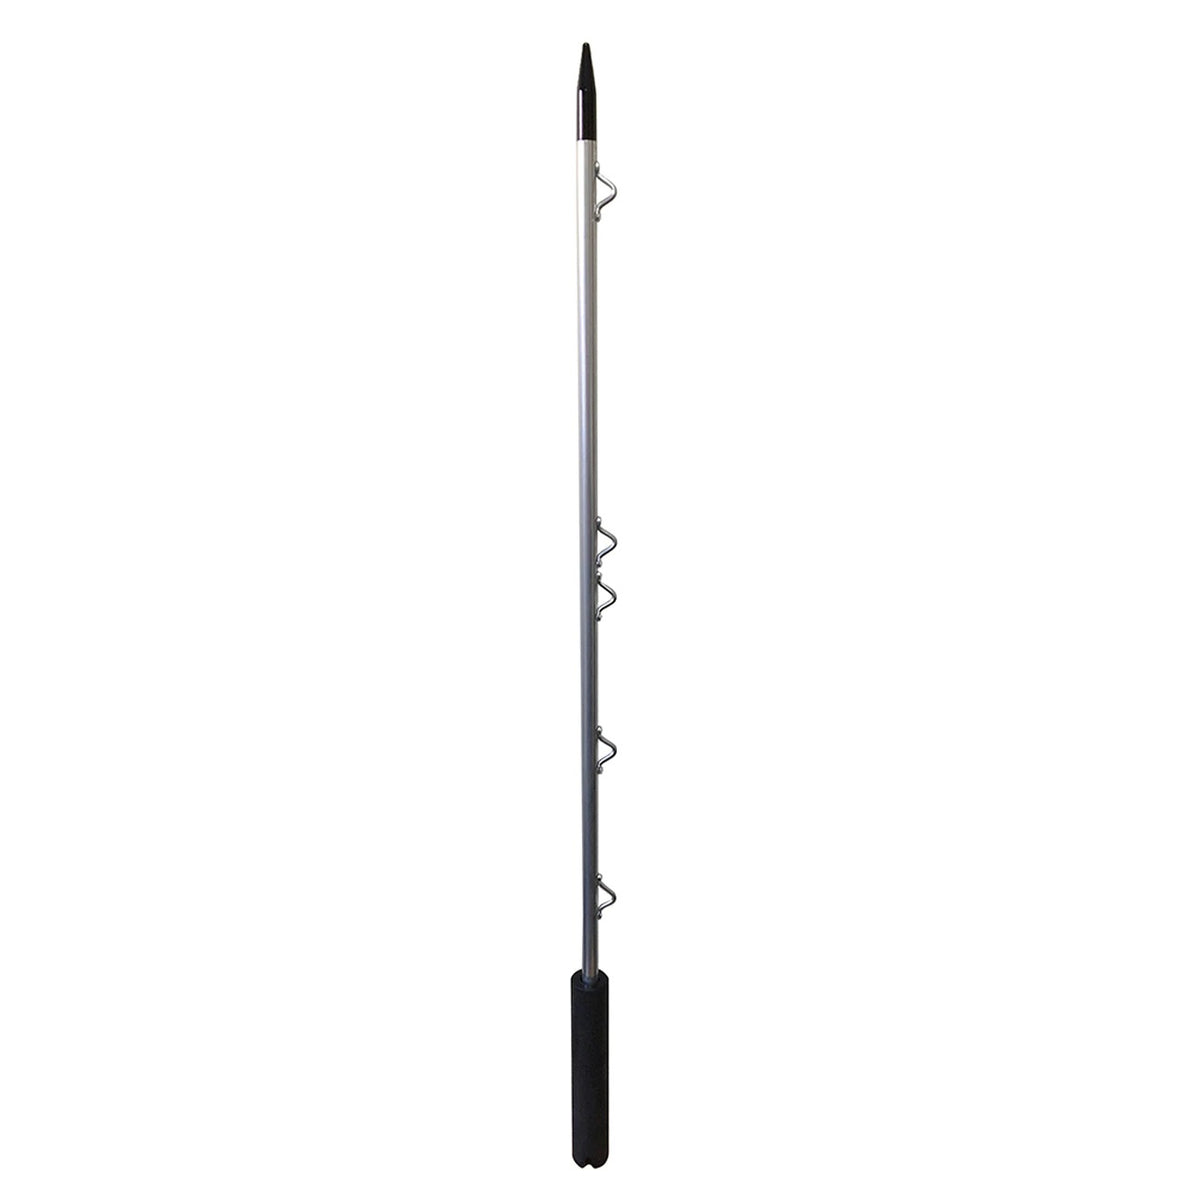 Tigress Outriggers XD Flag Pole for Rod Holder